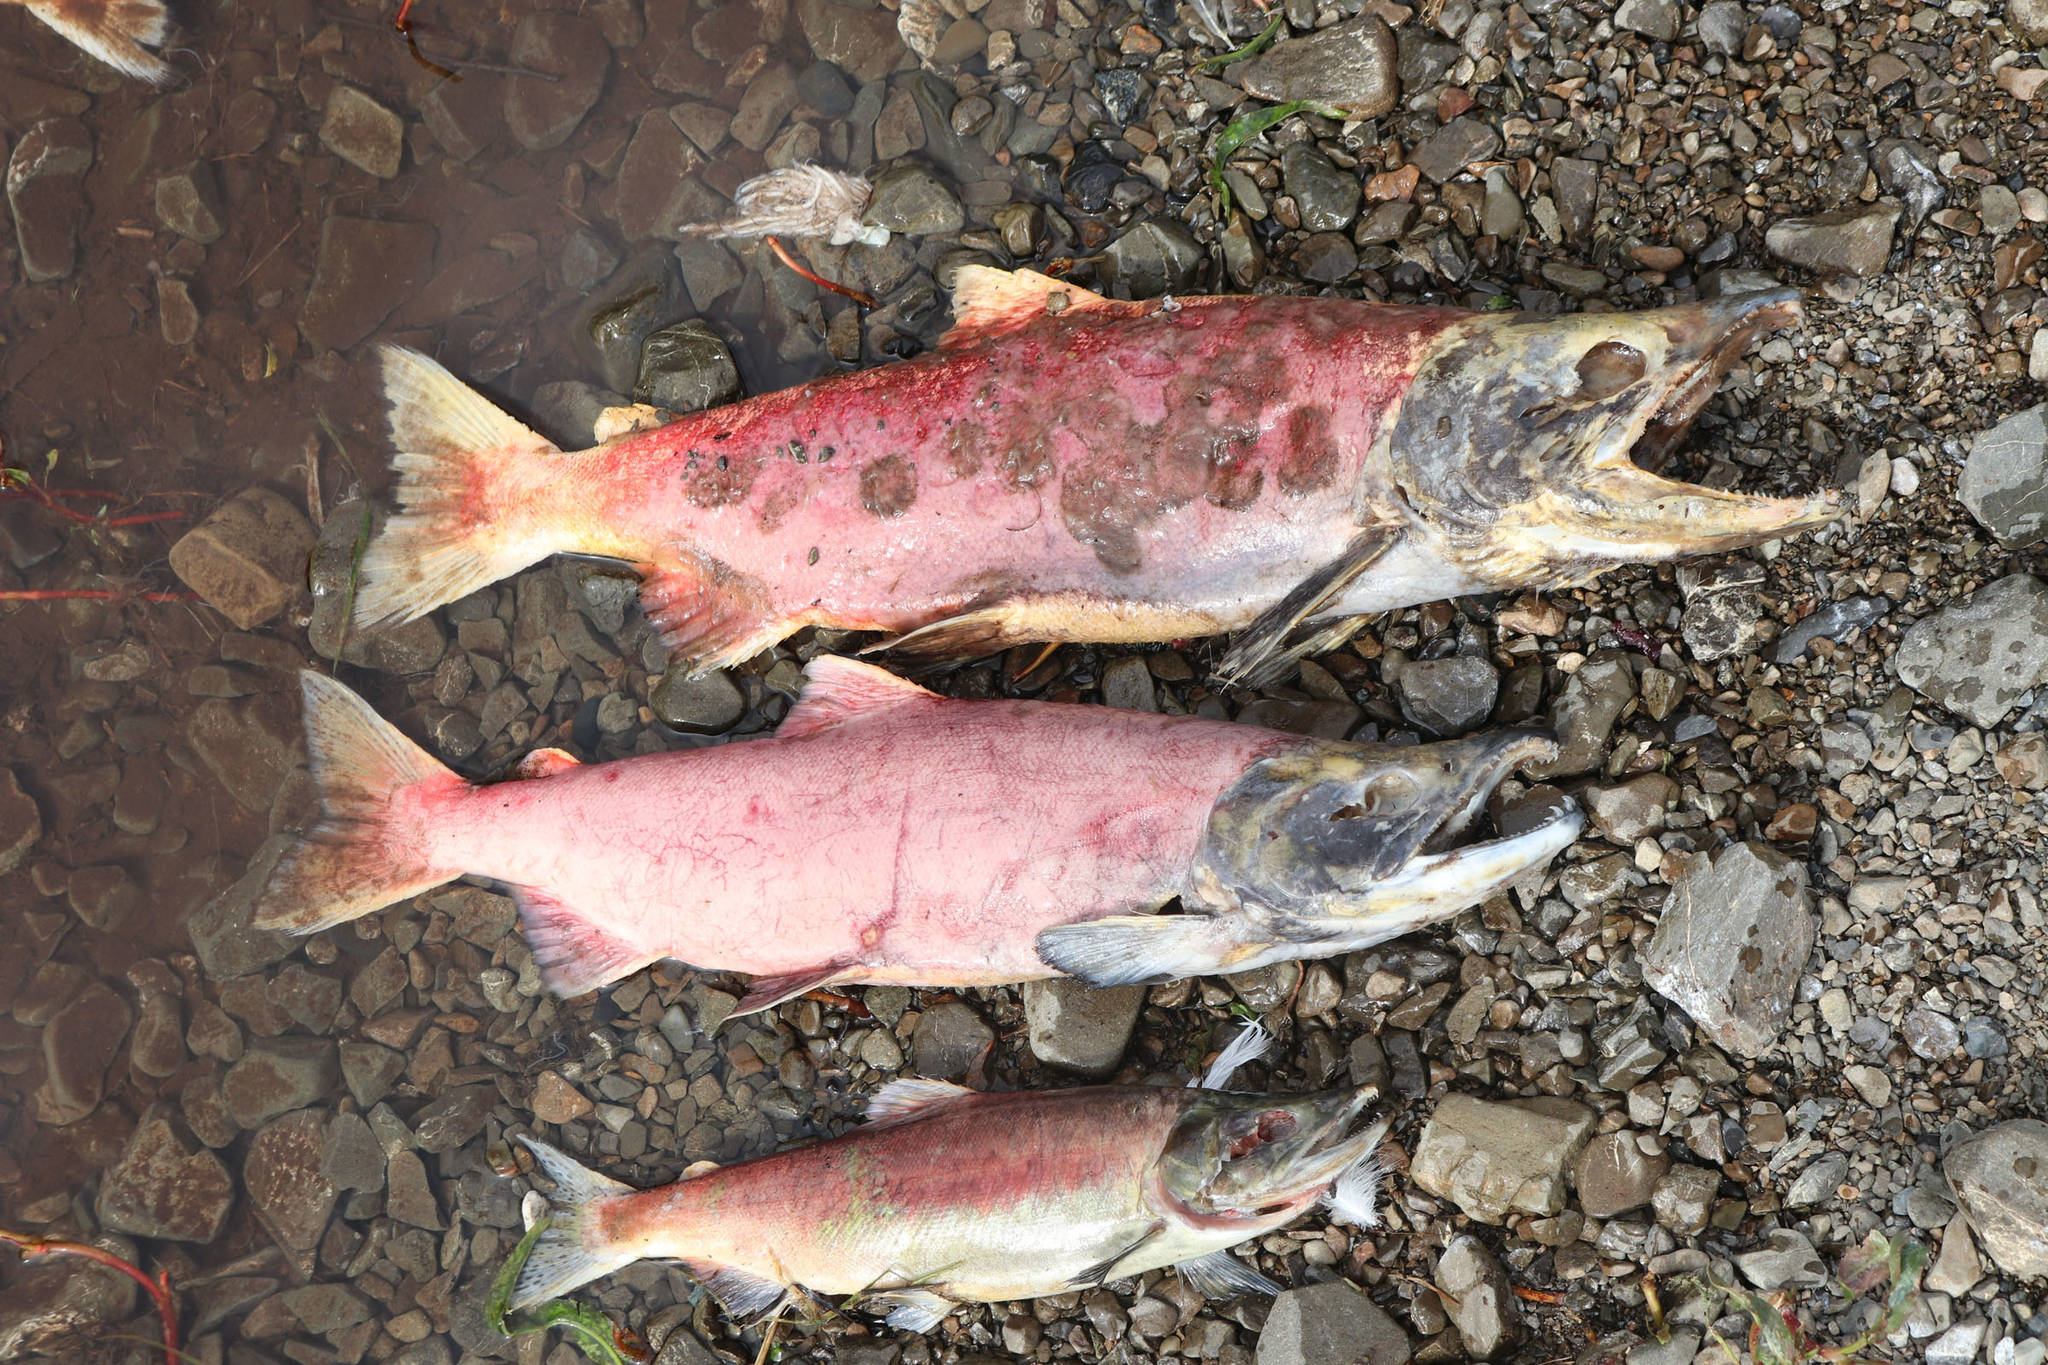 From bottom to top, a jack sockeye salmon, which has spent one year at sea, a sockeye that has spent two years at sea, and a sockeye that has spent three years at sea, as seen in Bristol Bay’s Wood River watershed in August 2018. (Mary Catharine Martin | SalmonState)